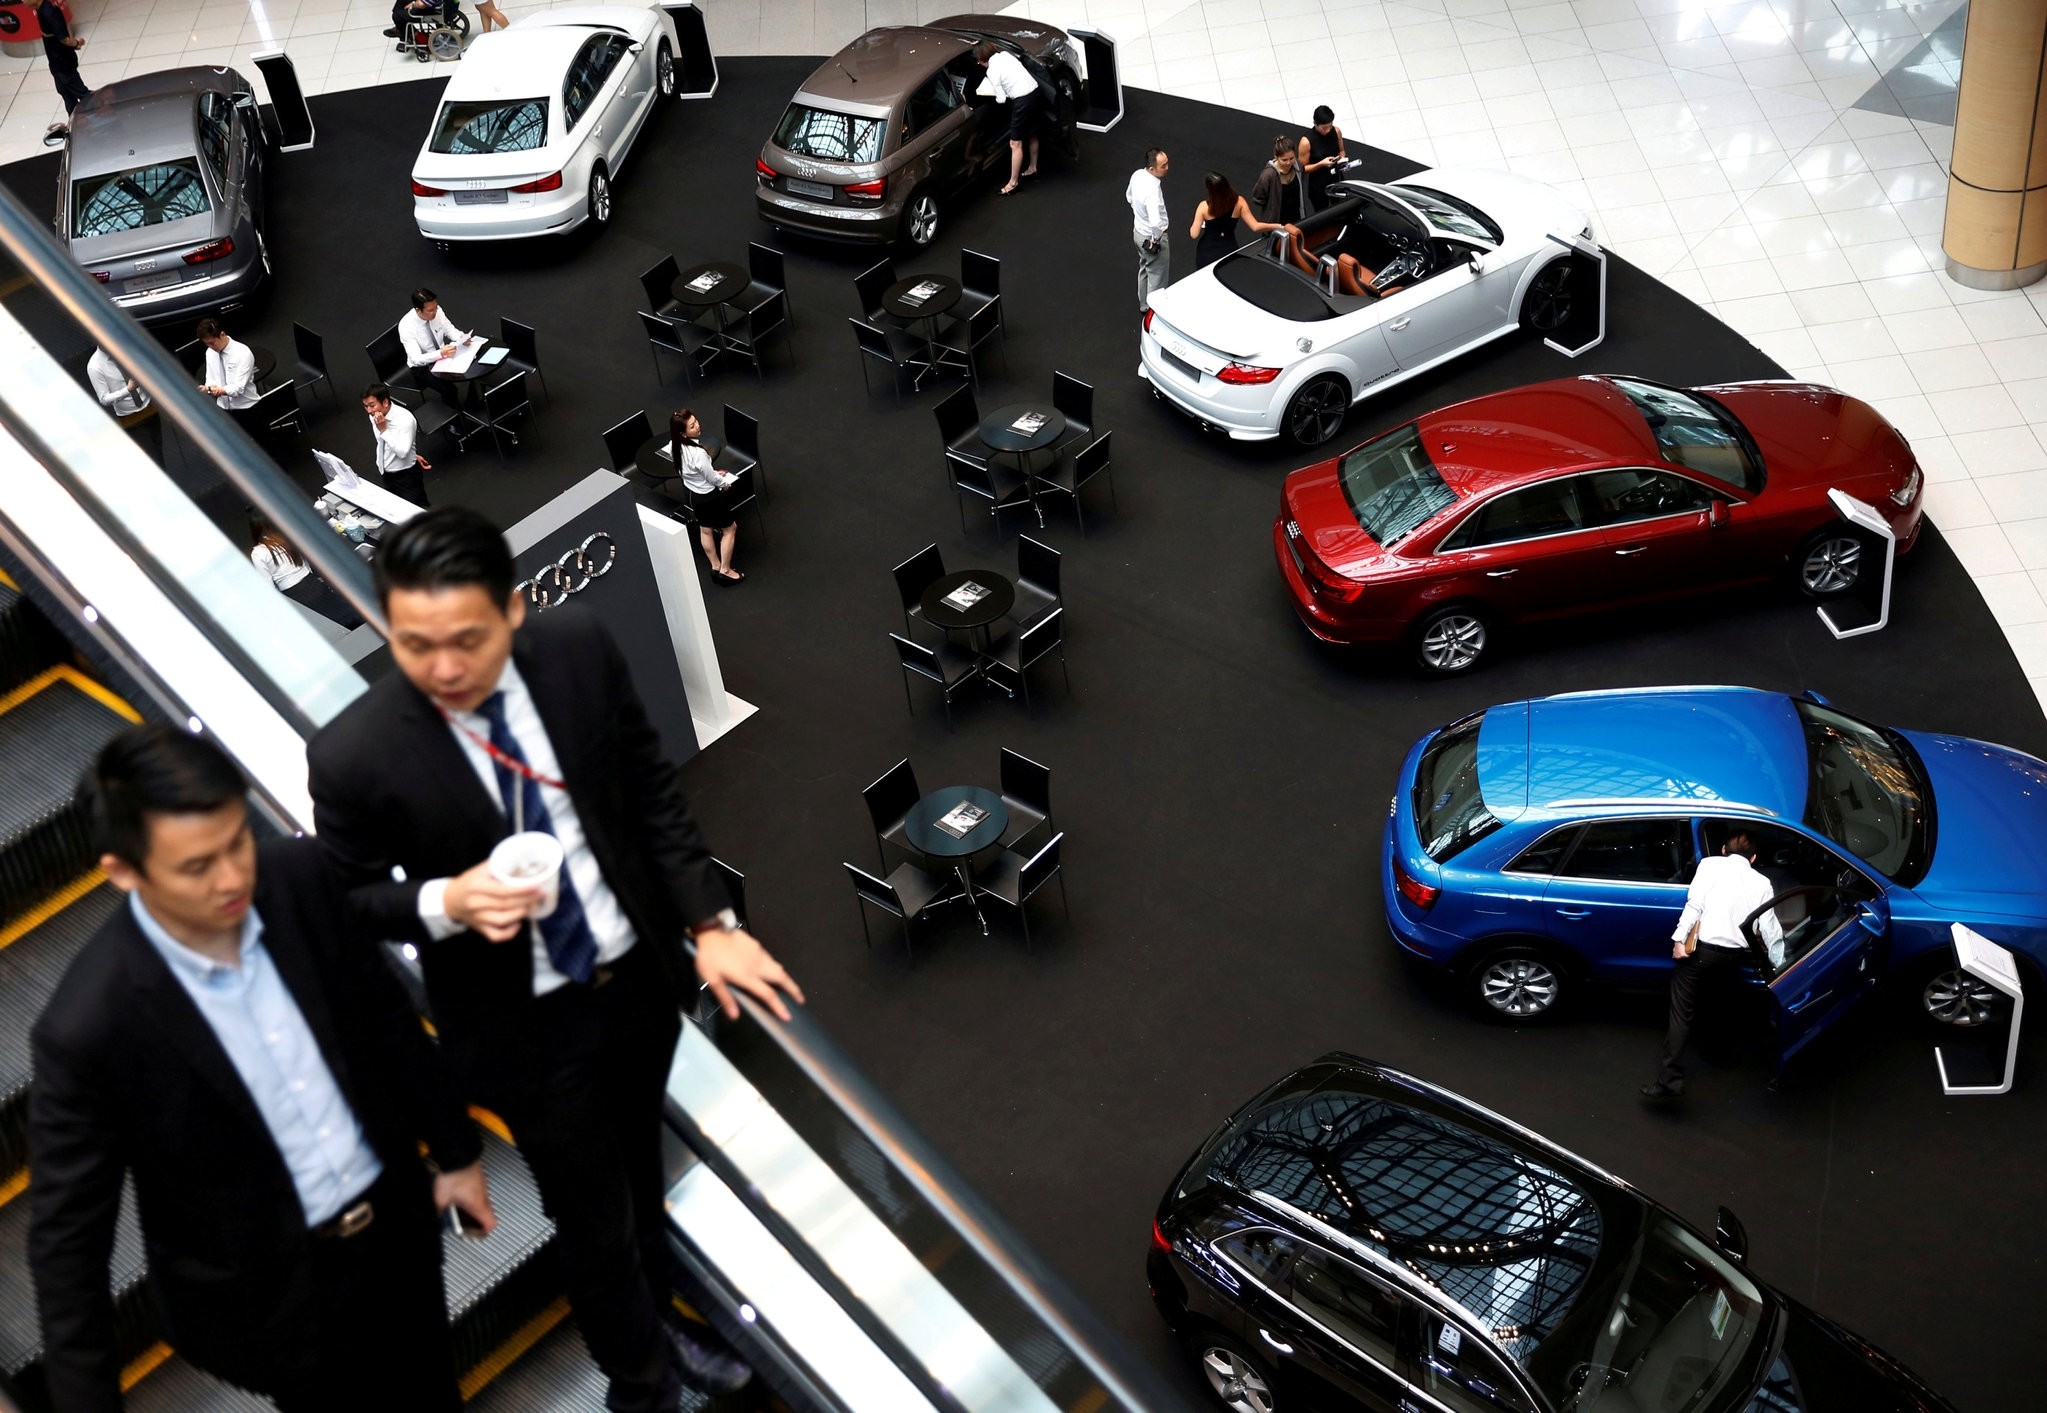 People look at cars on display at a mall in Singapore April 28, 2016. (REUTERS Photo)